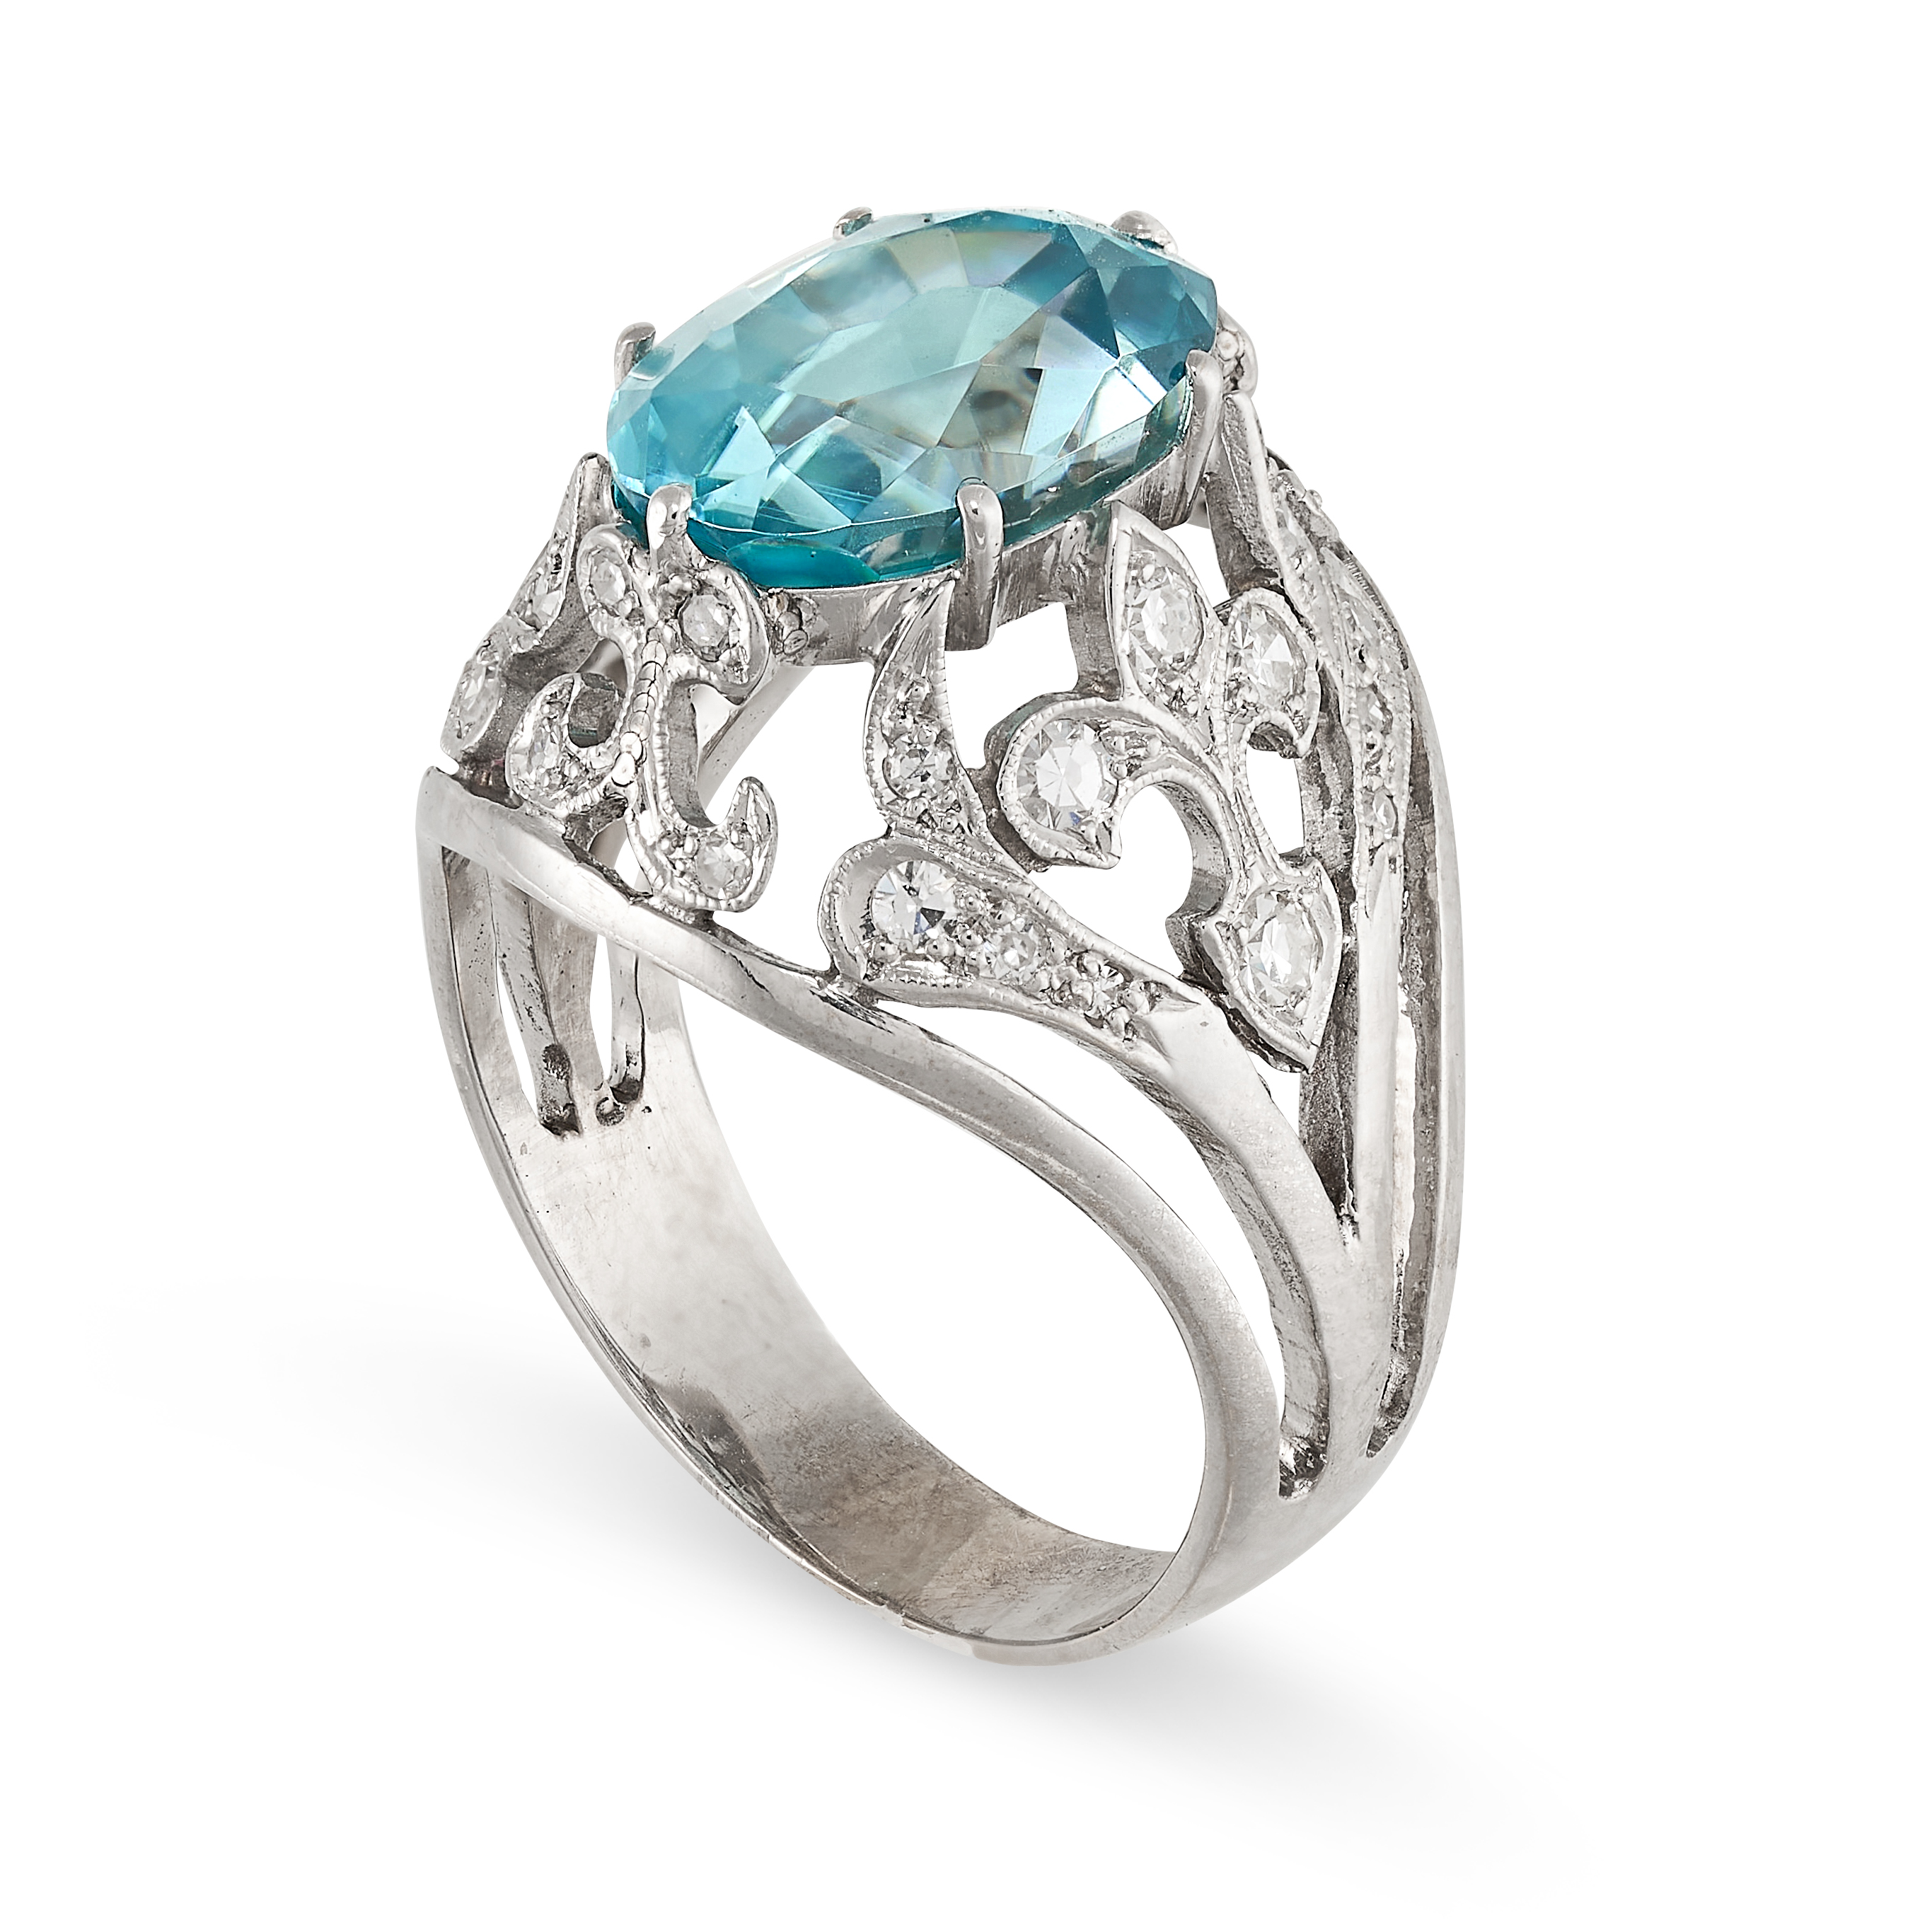 A BLUE ZIRCON AND DIAMOND DRESS RING set with a cushion cut blue zircon of 5.76 carats, accented - Image 2 of 2